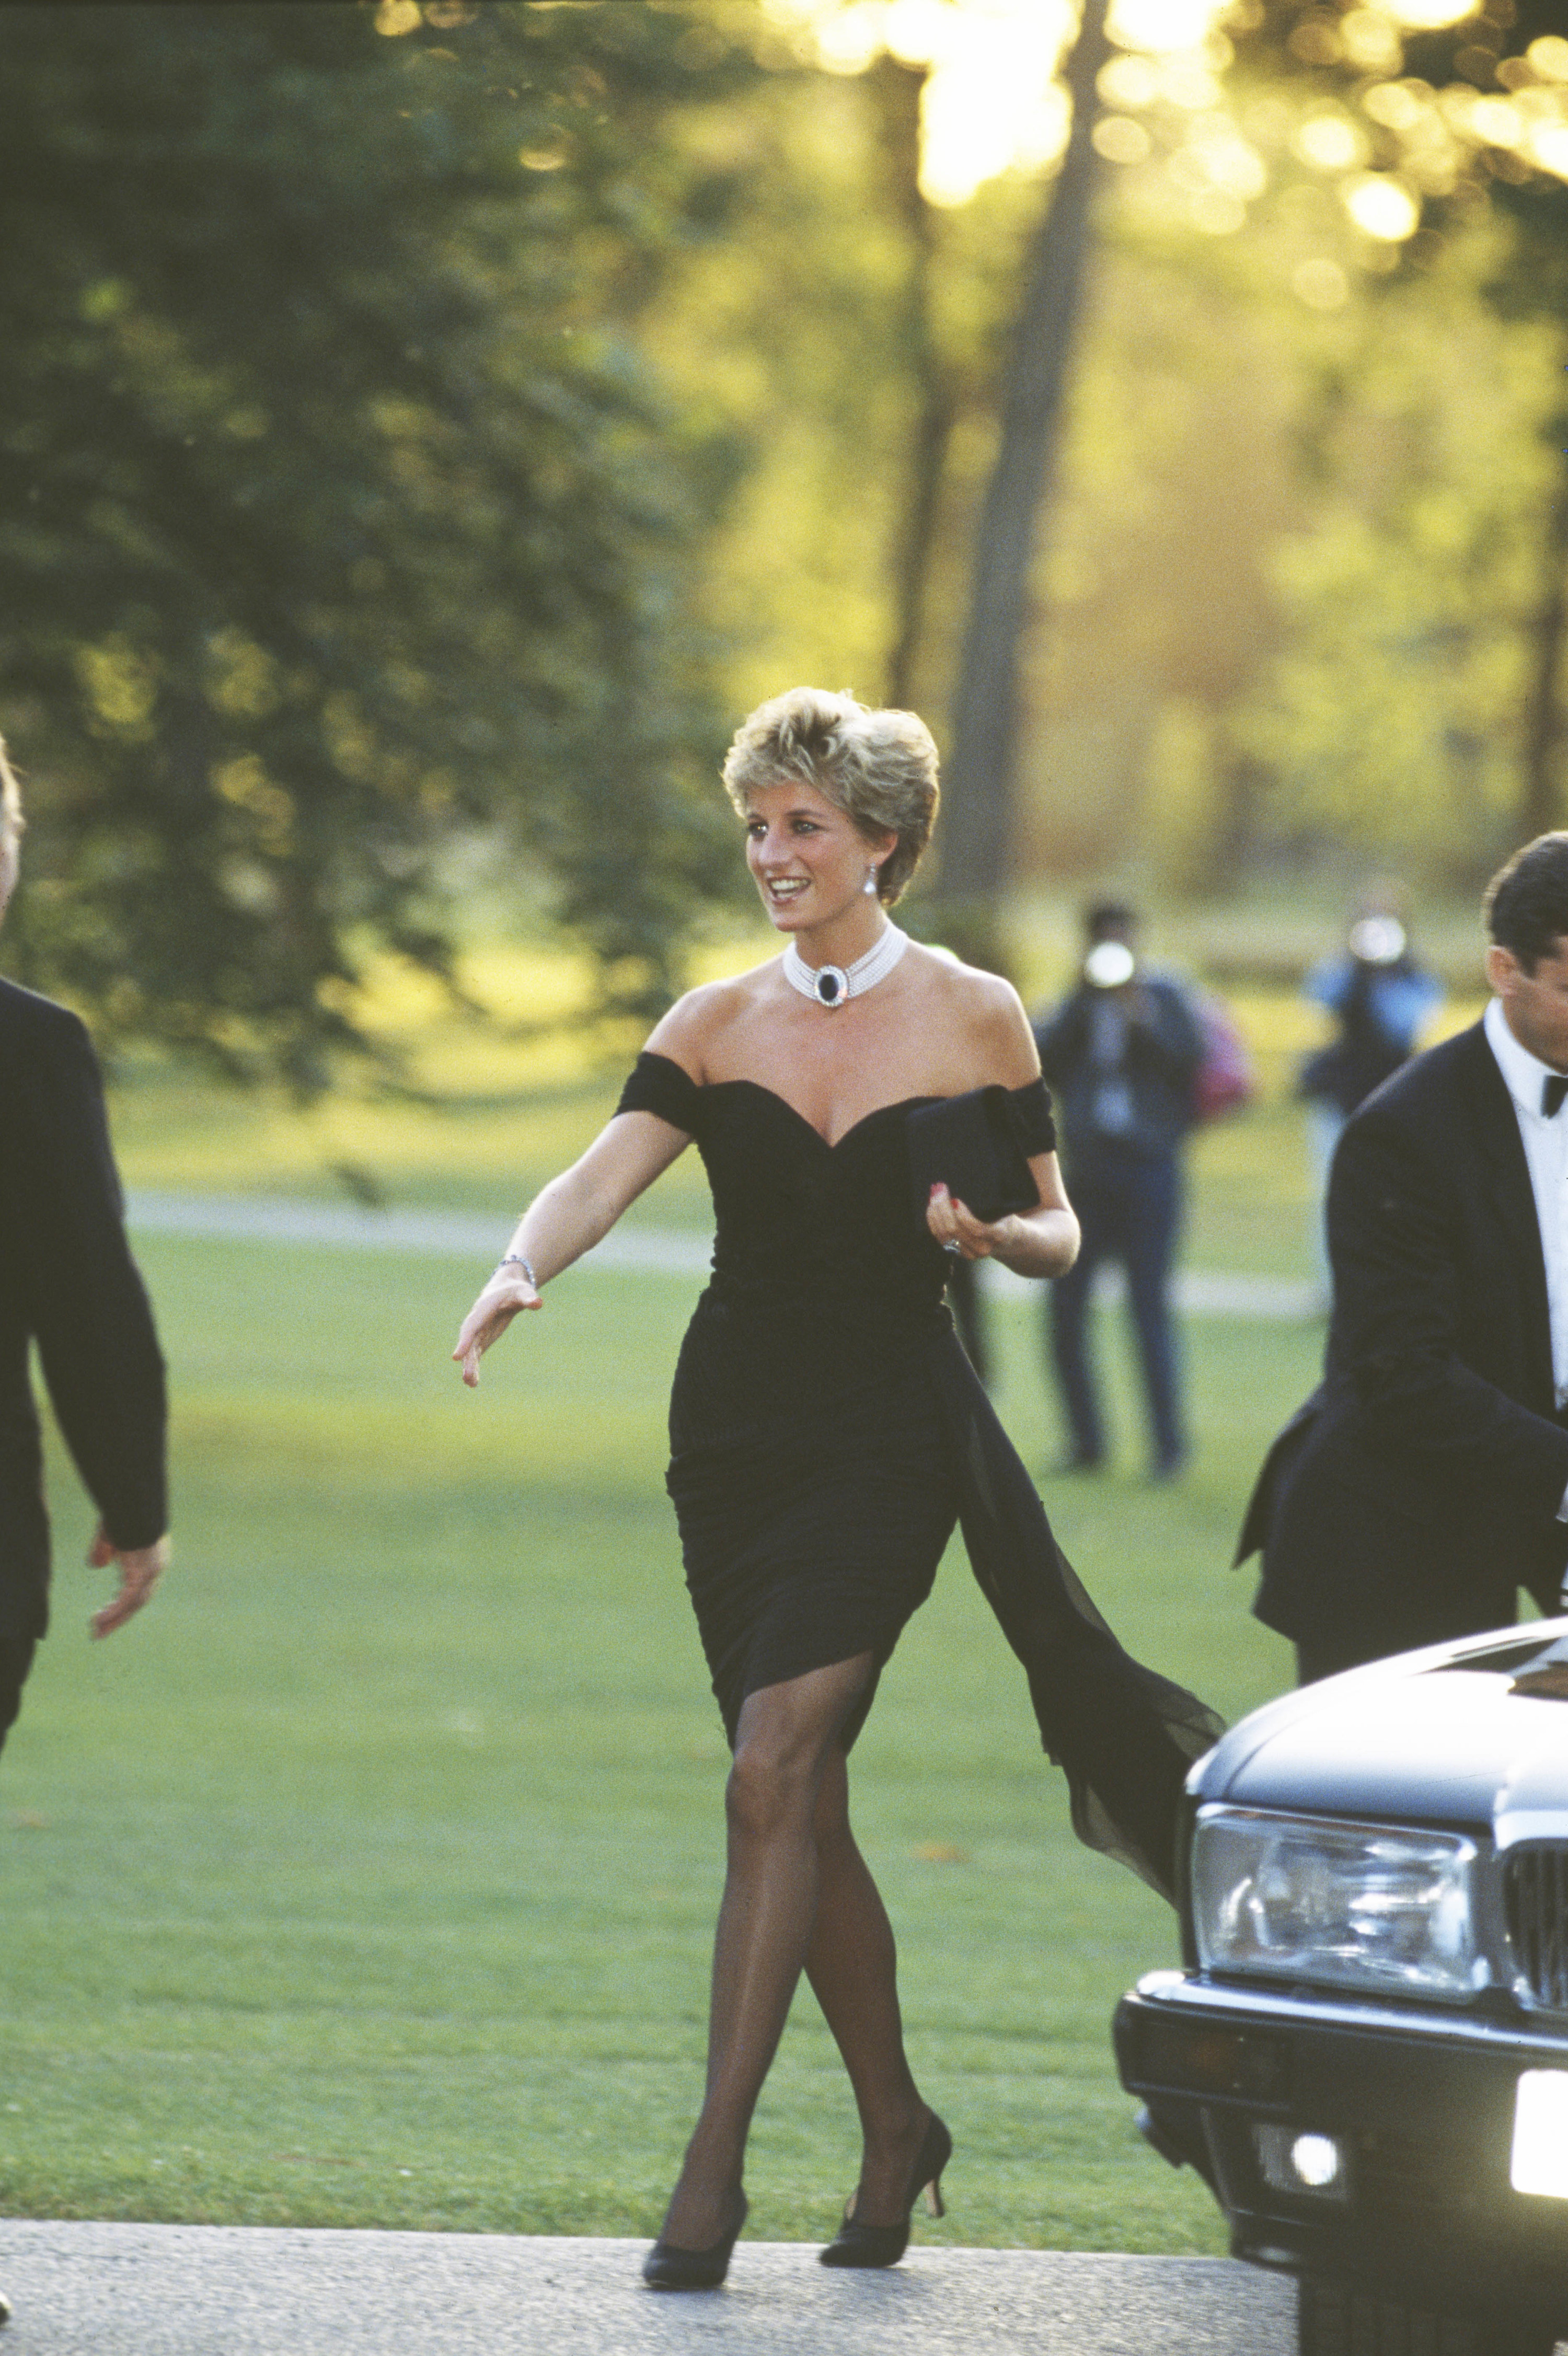 Princess Diana in the revenge dress with her arm outstretched to greet someone